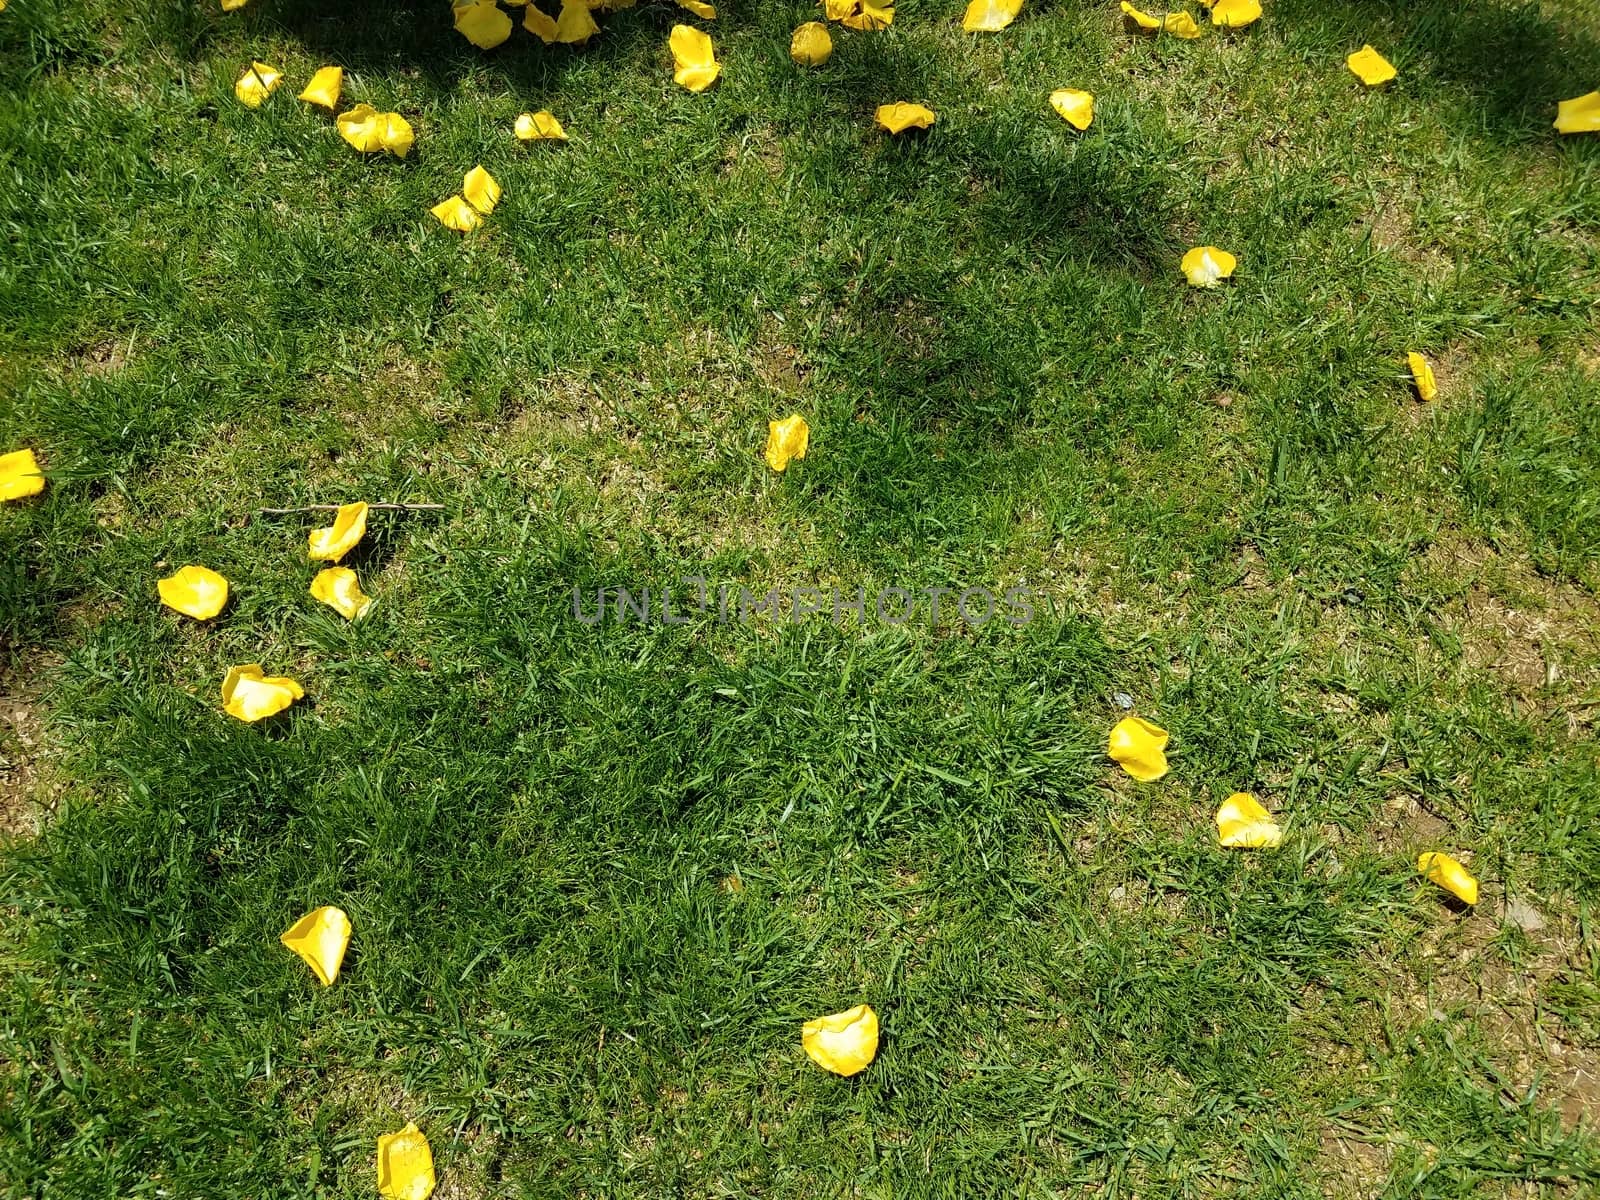 yellow flower petals on green grass lawn or yard outdoor